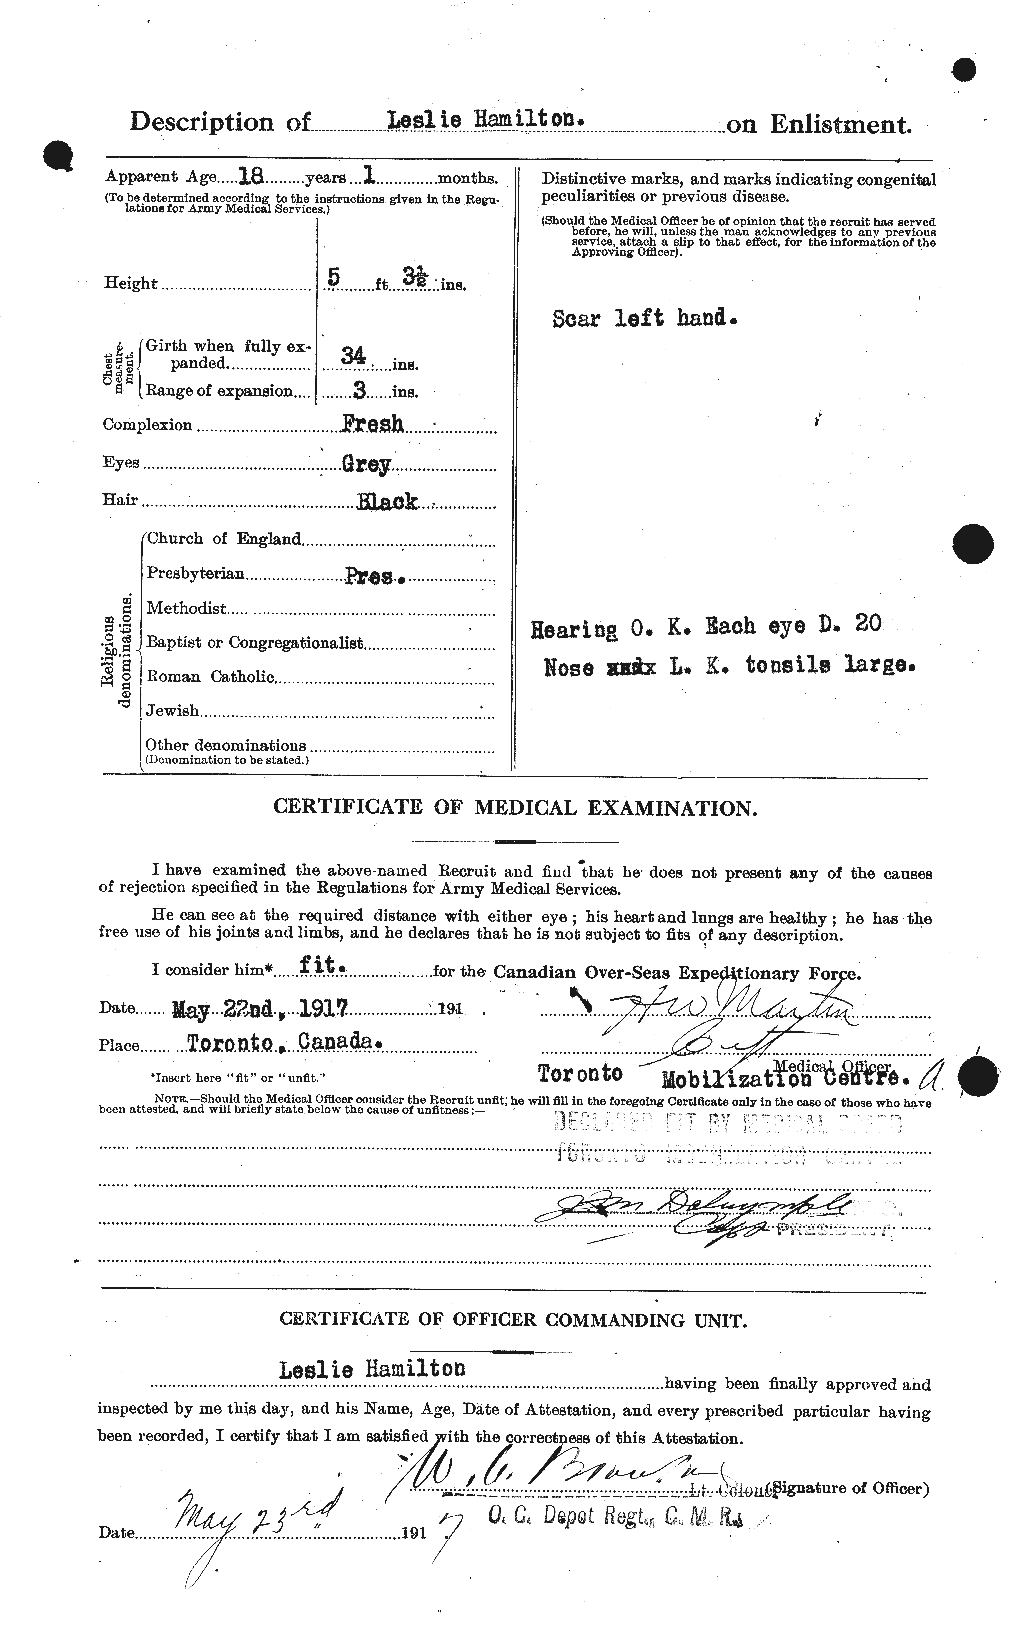 Personnel Records of the First World War - CEF 373164b